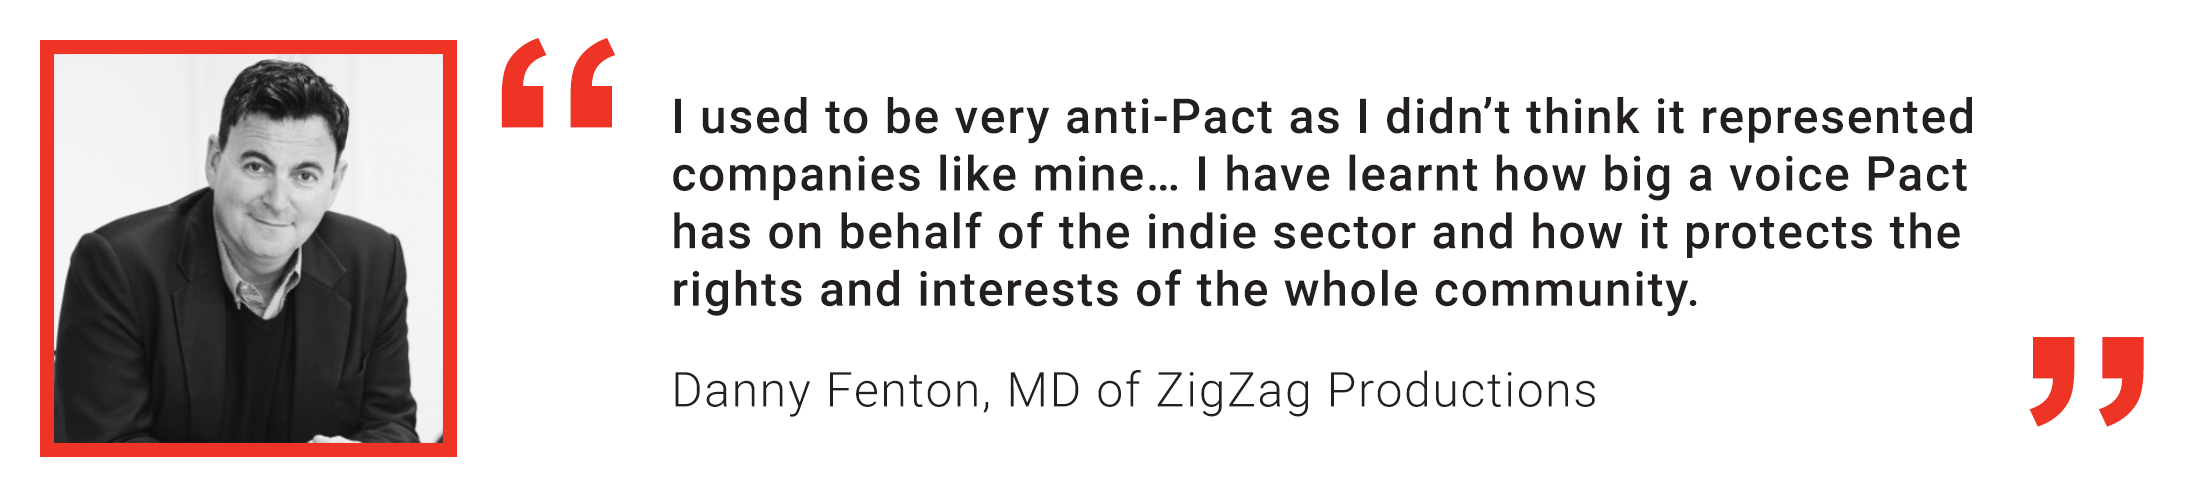 Member quote from Danny Fenton of ZigZag Productions: I used to be very anti-Pact as I didn’t think it represented companies like mine… I have learnt how big a voice Pact has on behalf of the indie se